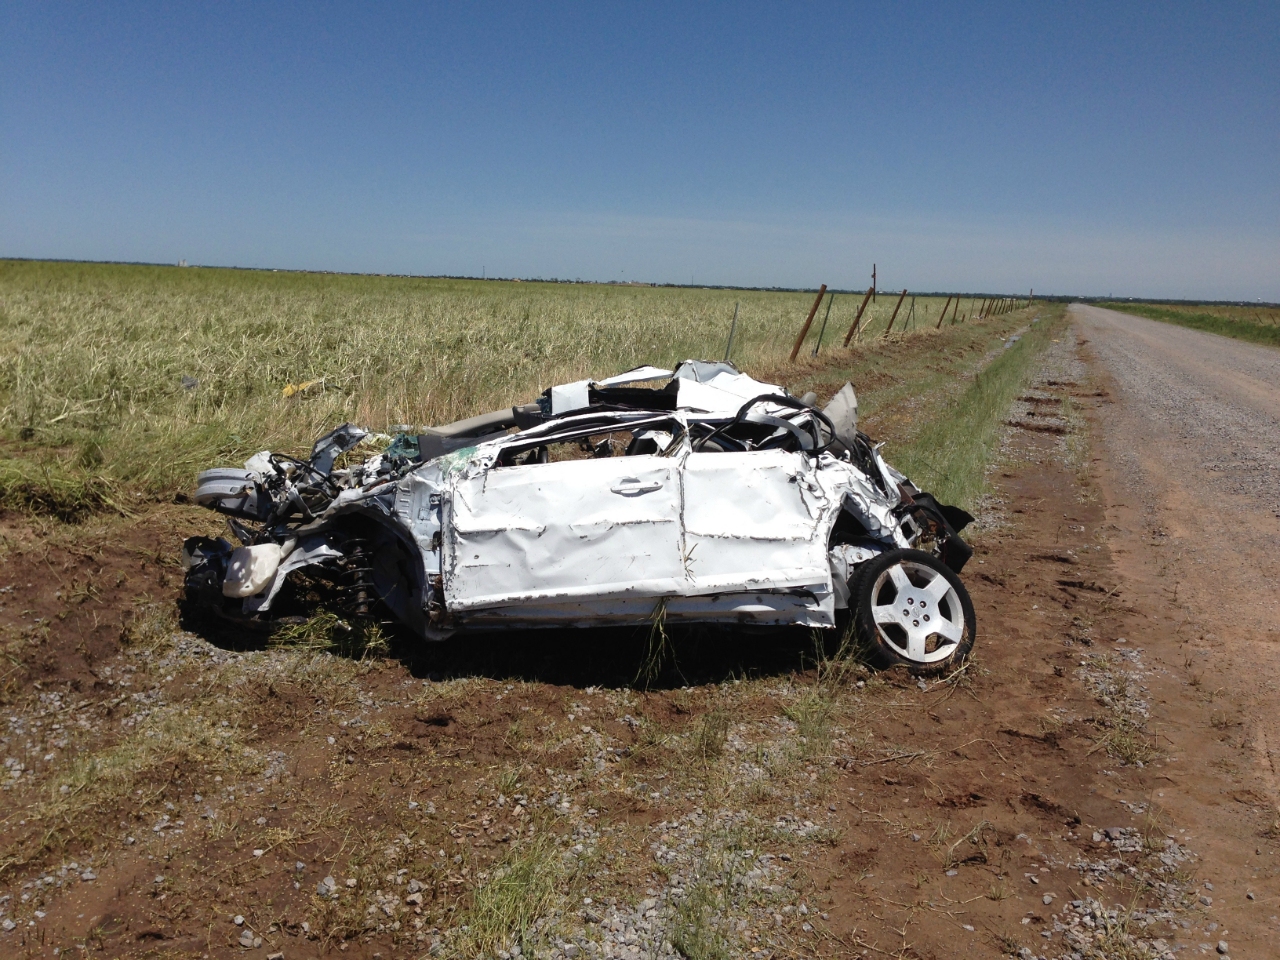 This photo shows a heavily damaged white Chevy Cobalt near the intersection of Reuter Road and S. Radio Road, or 4.8 miles southeast of El Reno, OK. Three storm chasers were killed when this vehicle was hit by one of sub-vortices within the larger circulation of the El Reno tornado. Credit: National Weather Service.